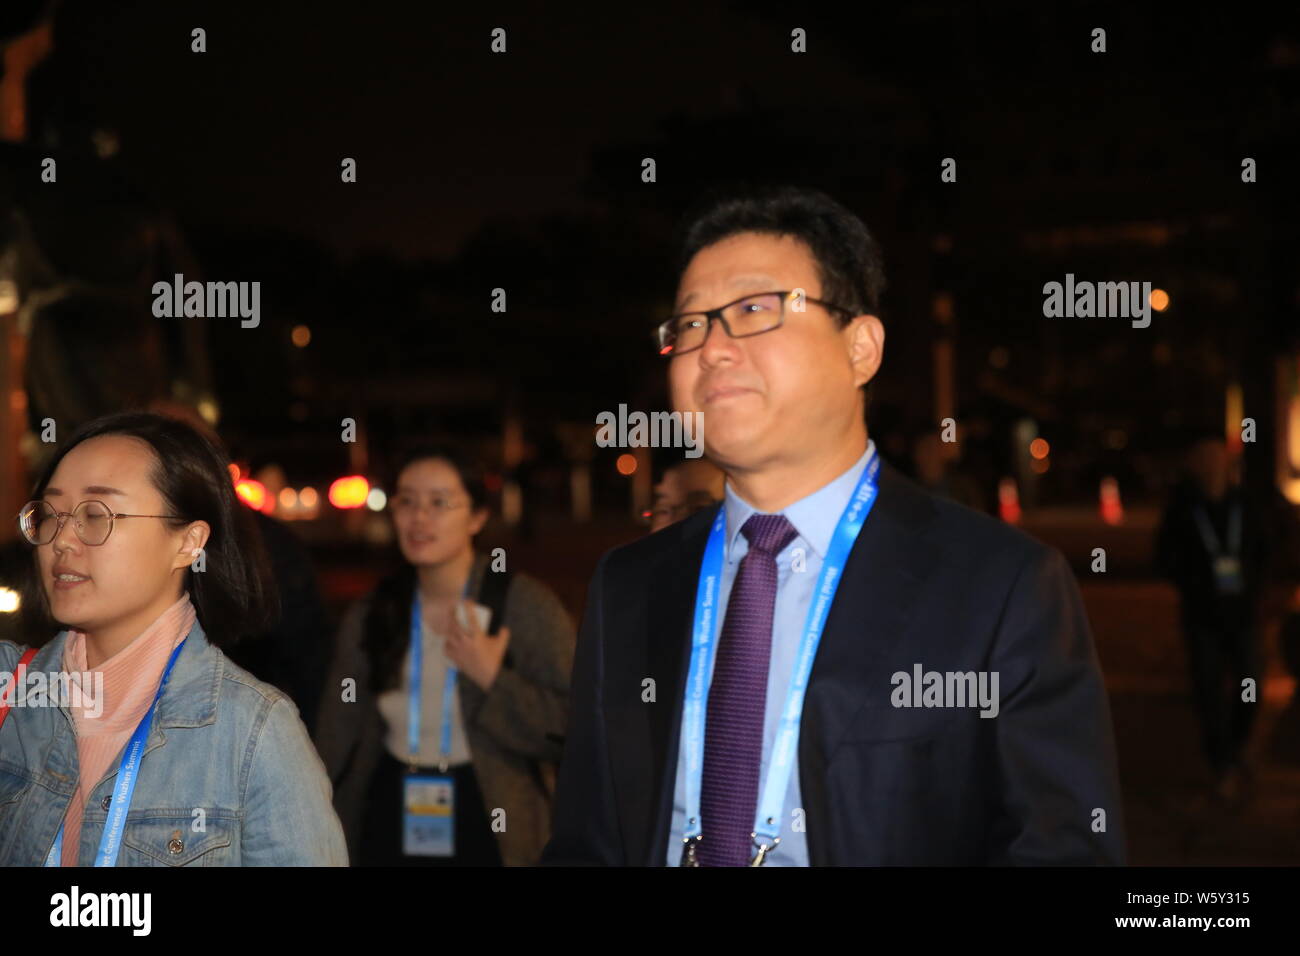 William Ding or Ding Lei, CEO of Netease (163.com), arrives for the 5th World Internet Conference (WIC), also known as Wuzhen Summit, in Wuzhen town, Stock Photo